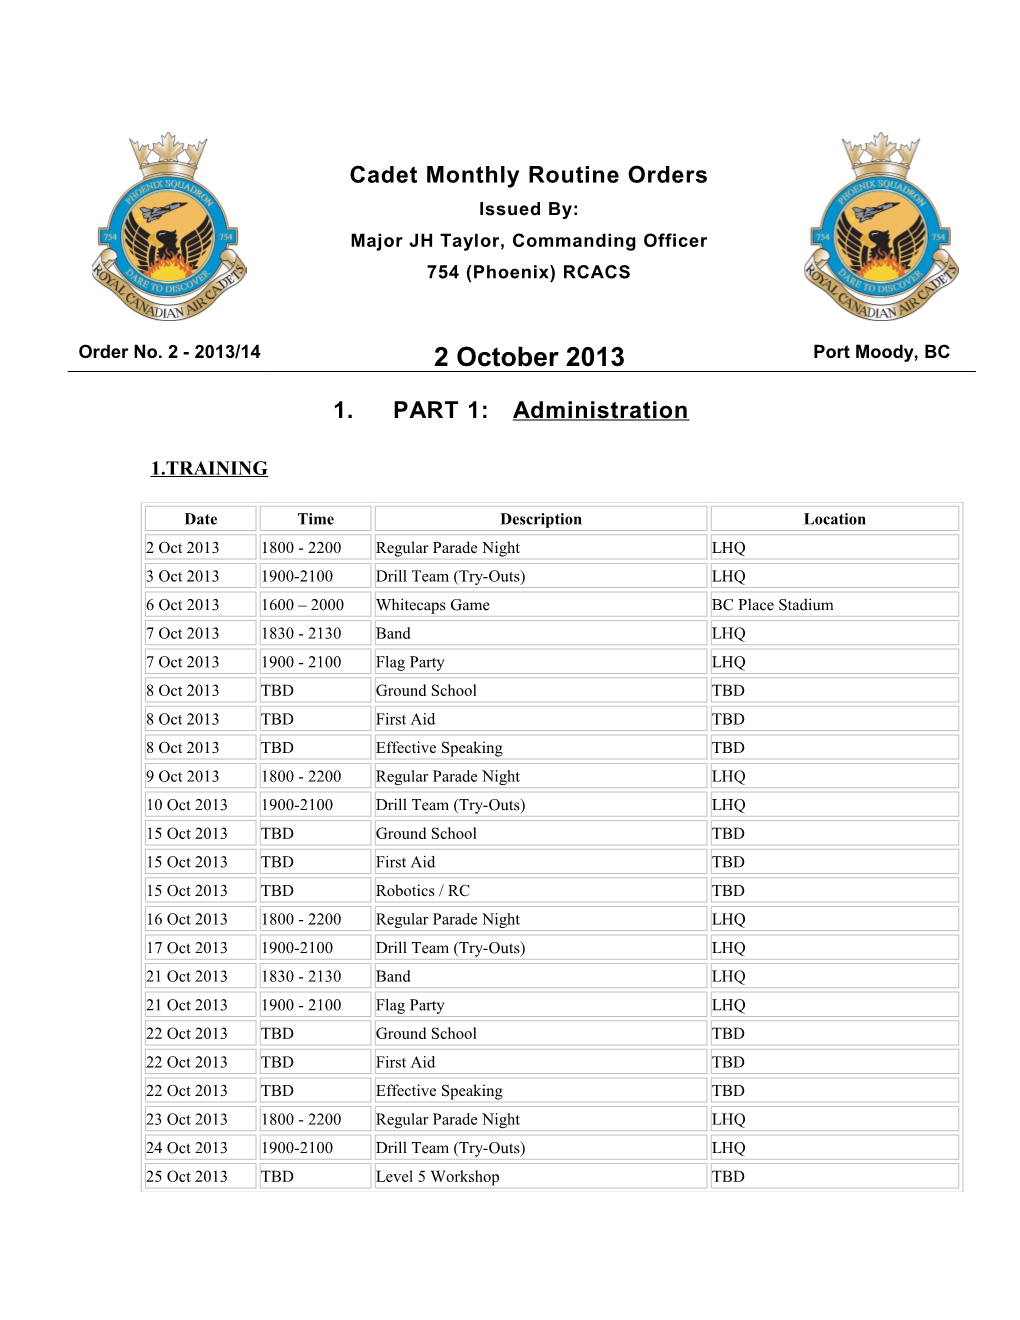 Cadet Monthly Routine Ordersissued By:Majorjh Taylor, Commanding Officer754 (Phoenix) RCACS